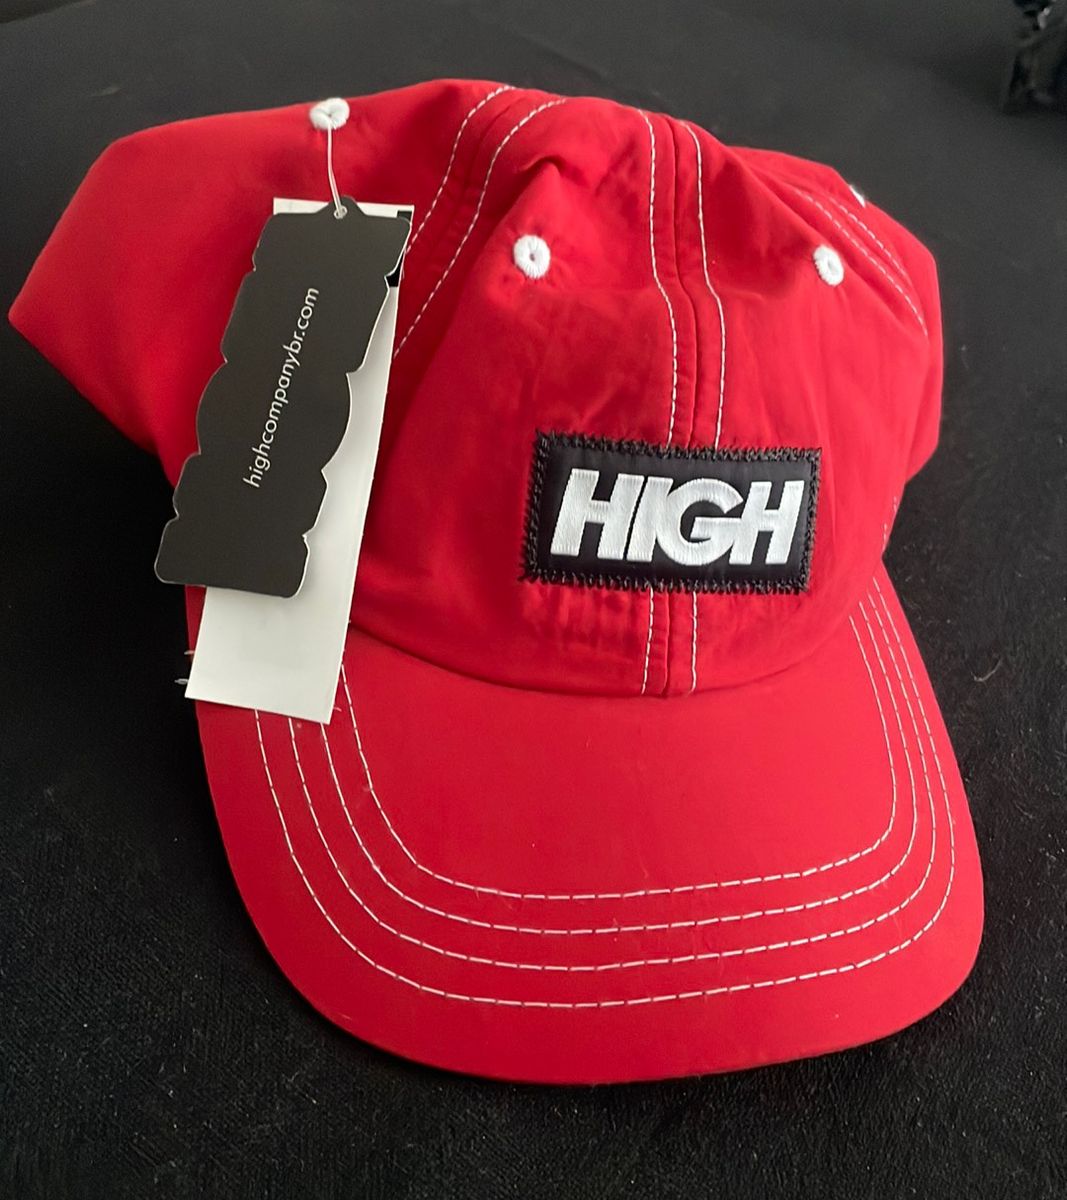 Boné High 6 Panel Ripstop Colored Red - Street Wear Company